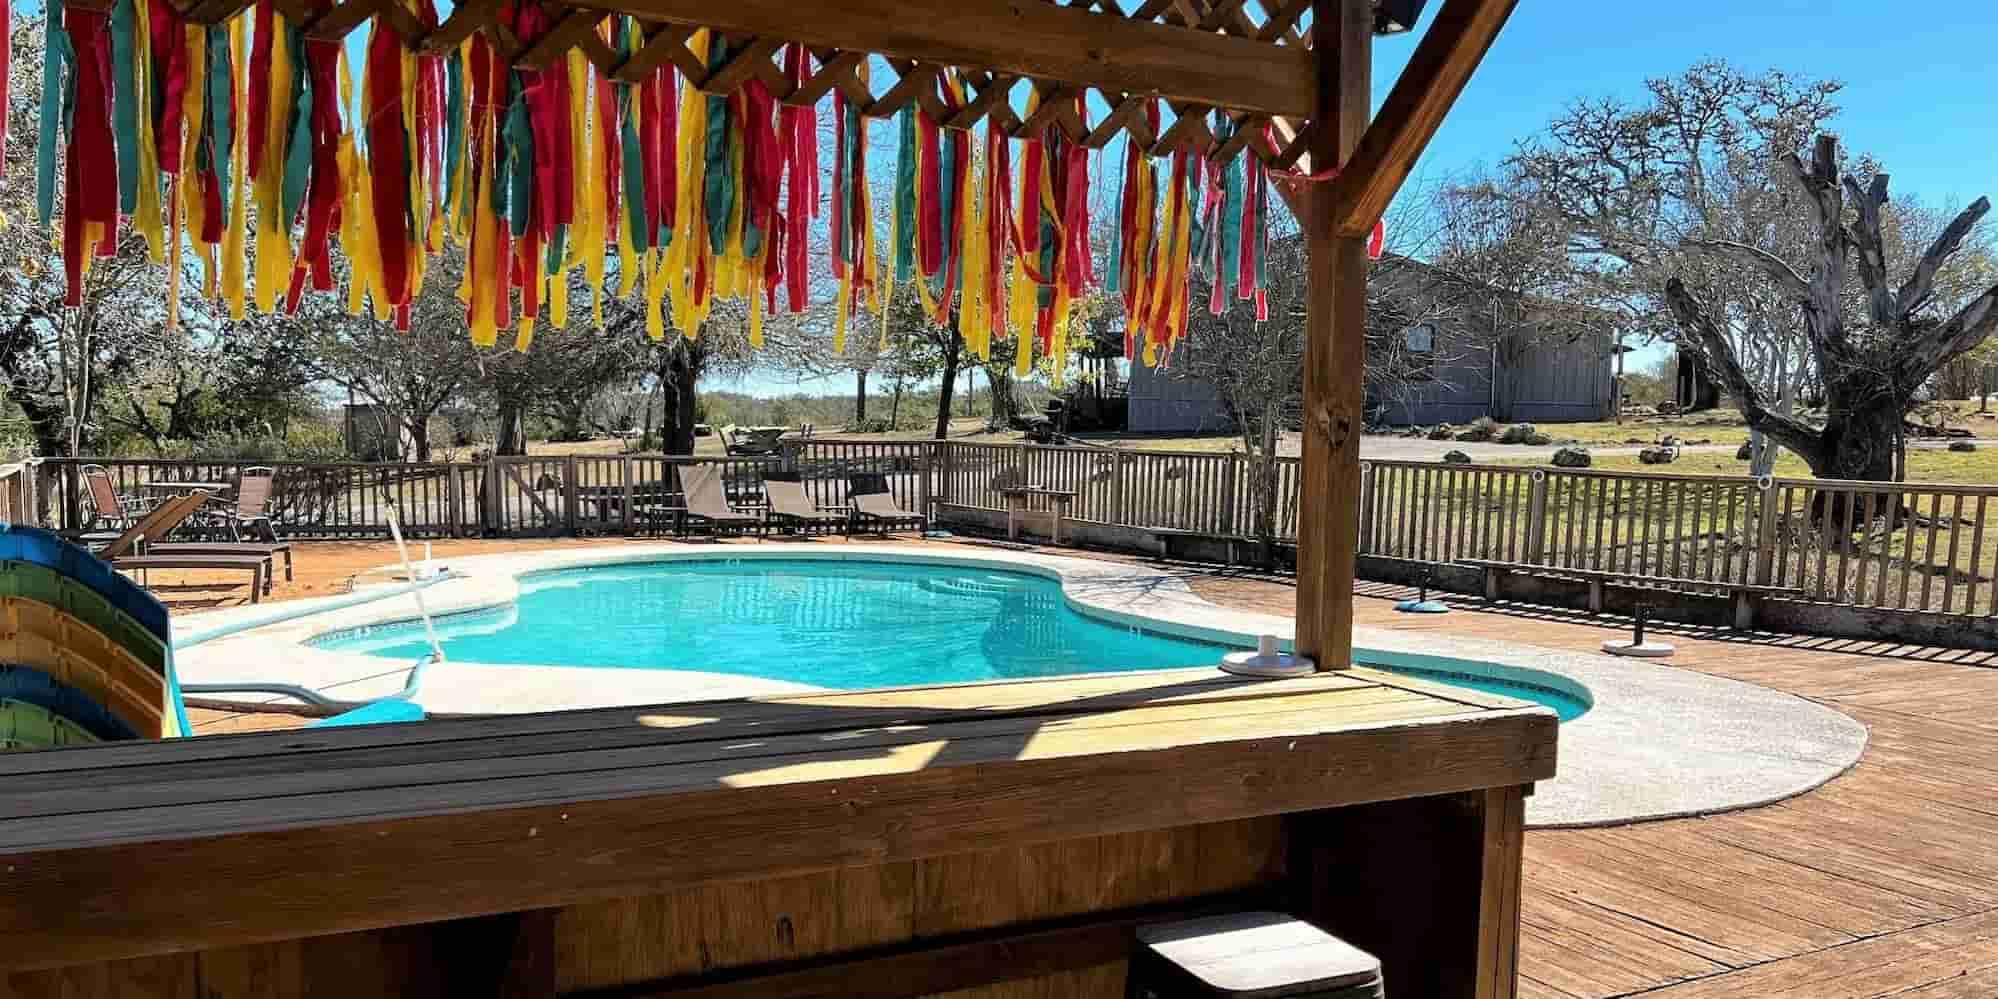 The ranch swimming pool viewed from over the cabana countertop